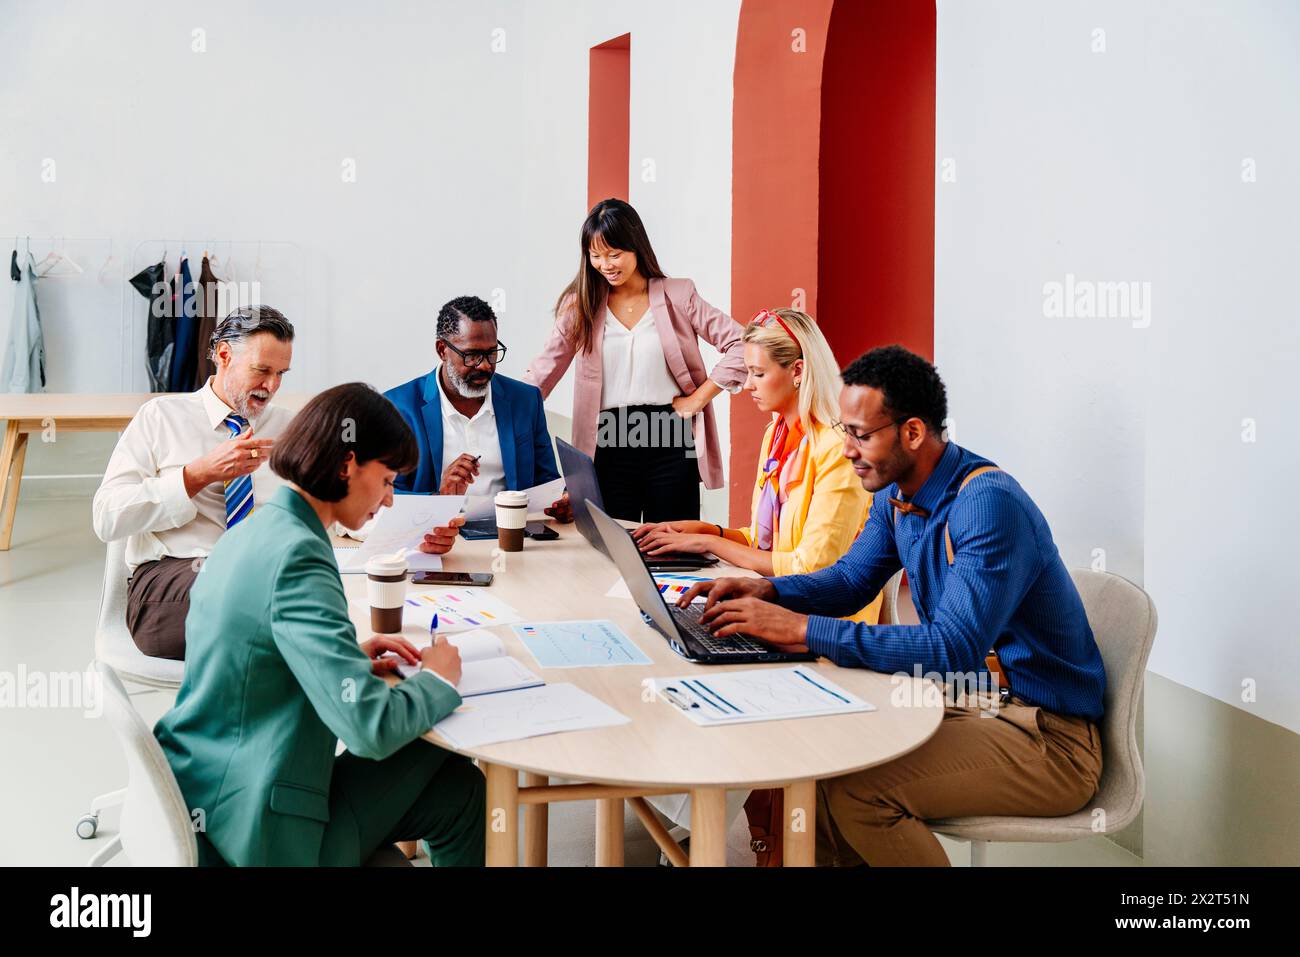 Multi-ethnic corporate business team at work place Stock Photo